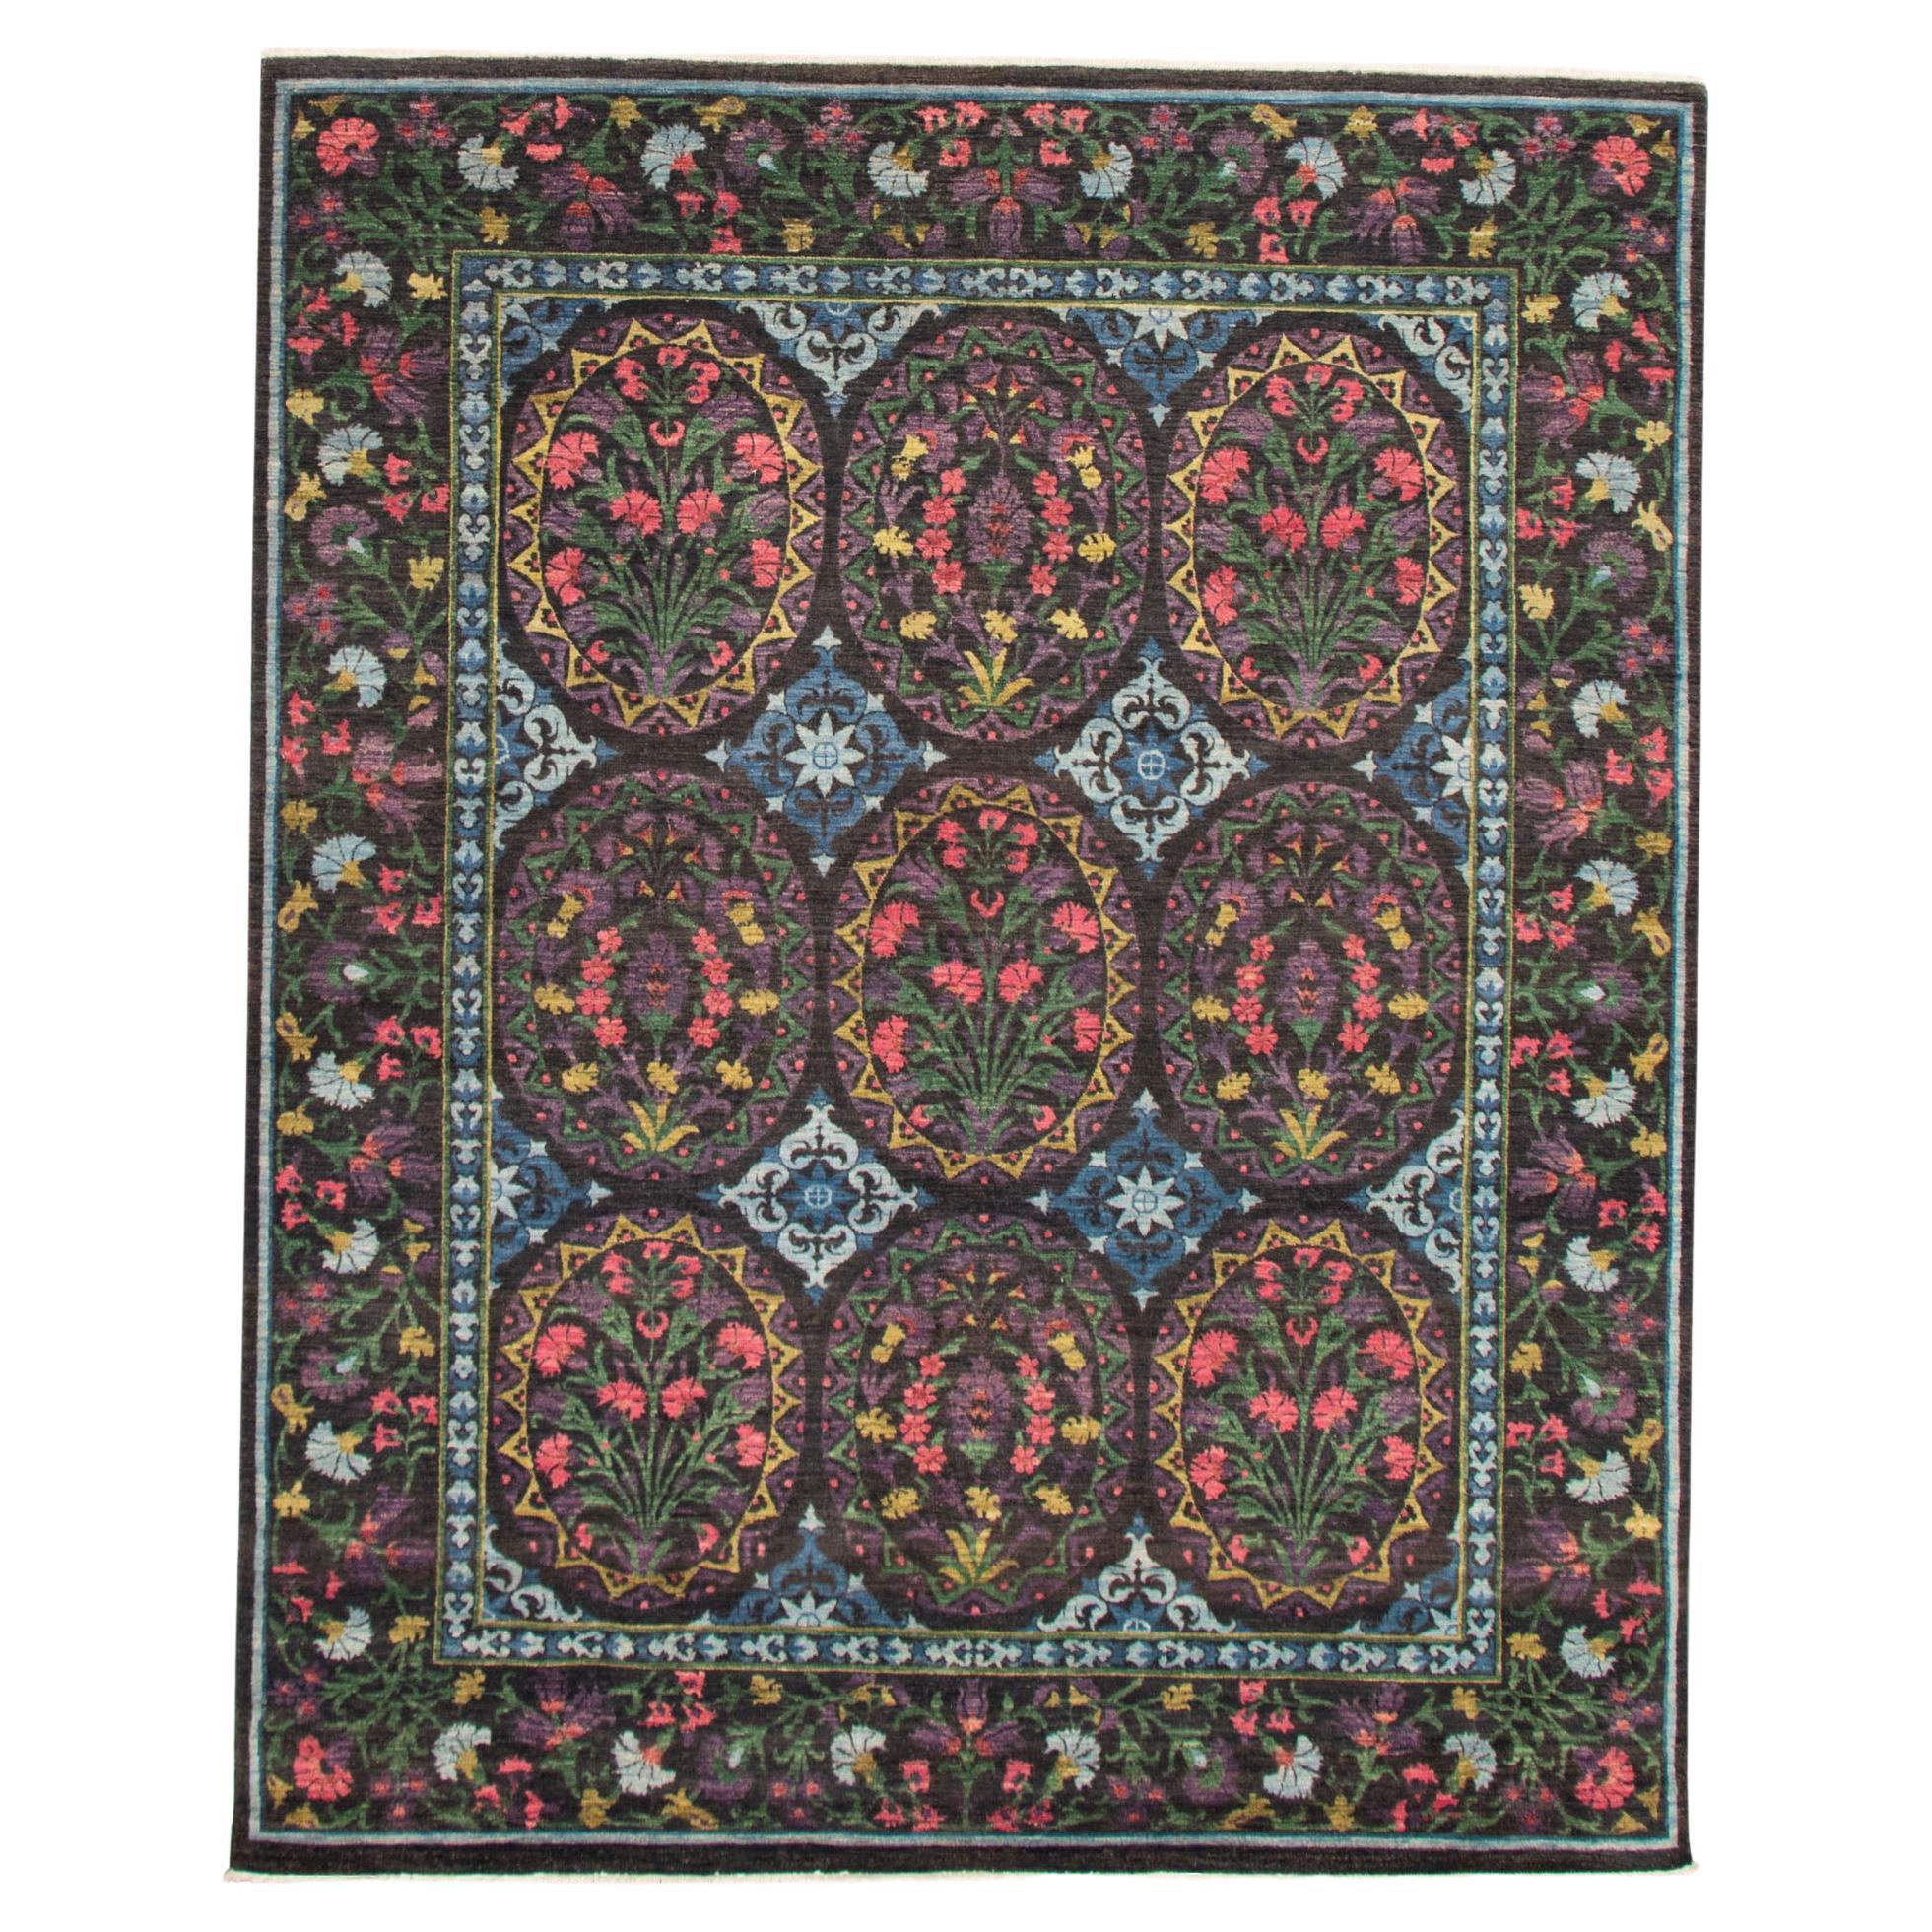 Transitional Hand-knotted Lahore Carpet with Floral Design, 8' x 10'